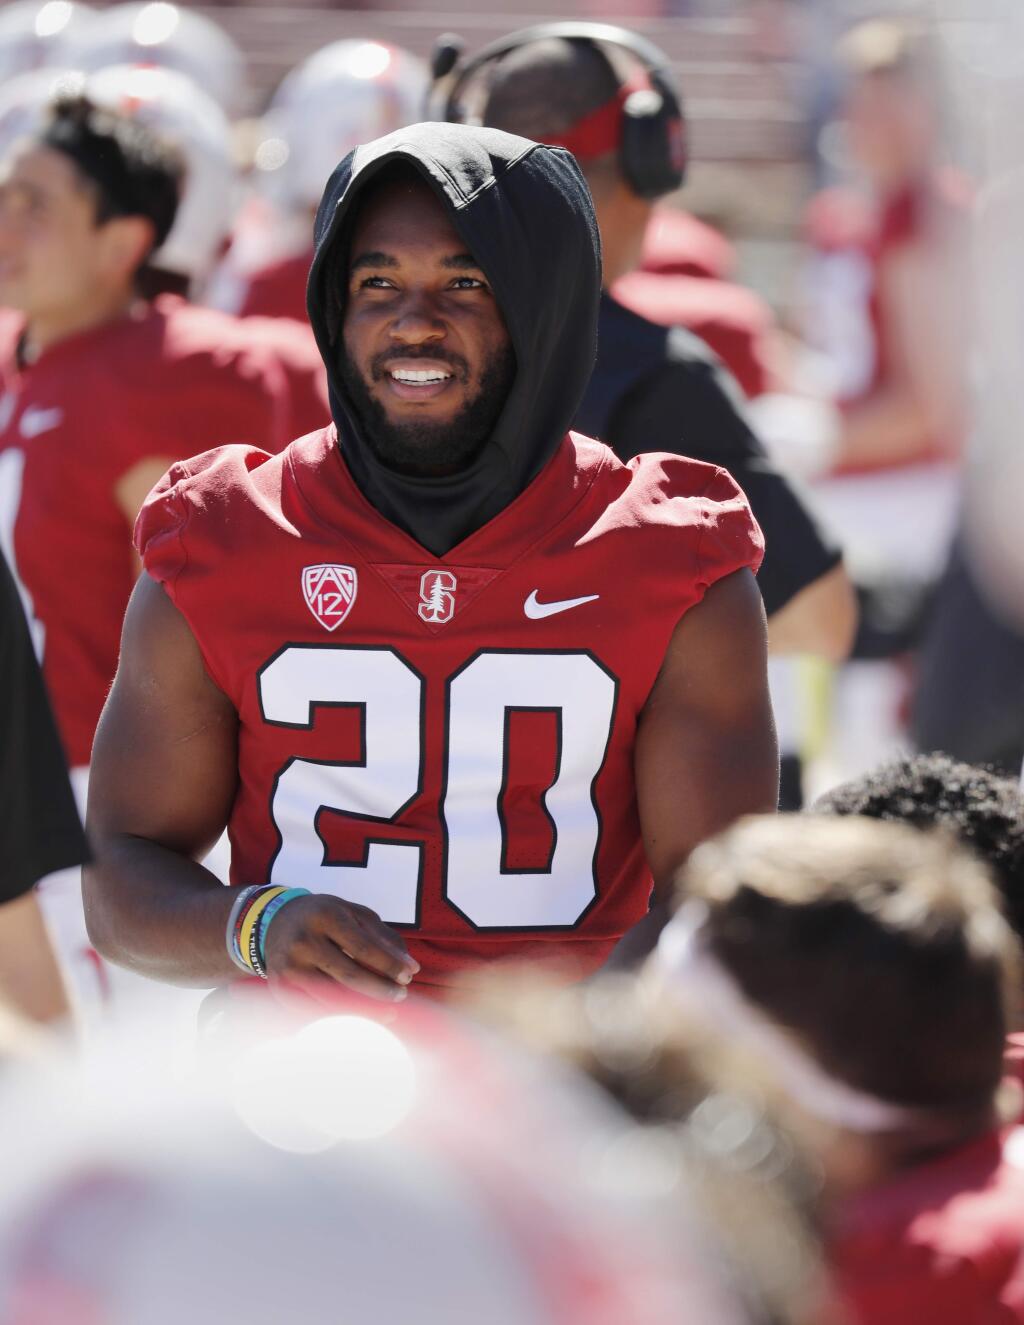 Stanford running back Bryce Love hangs out on the sideline with an injury in the first half in Stanford on Saturday, Sept. 15, 2018. (AP Photo/Jim Gensheimer)